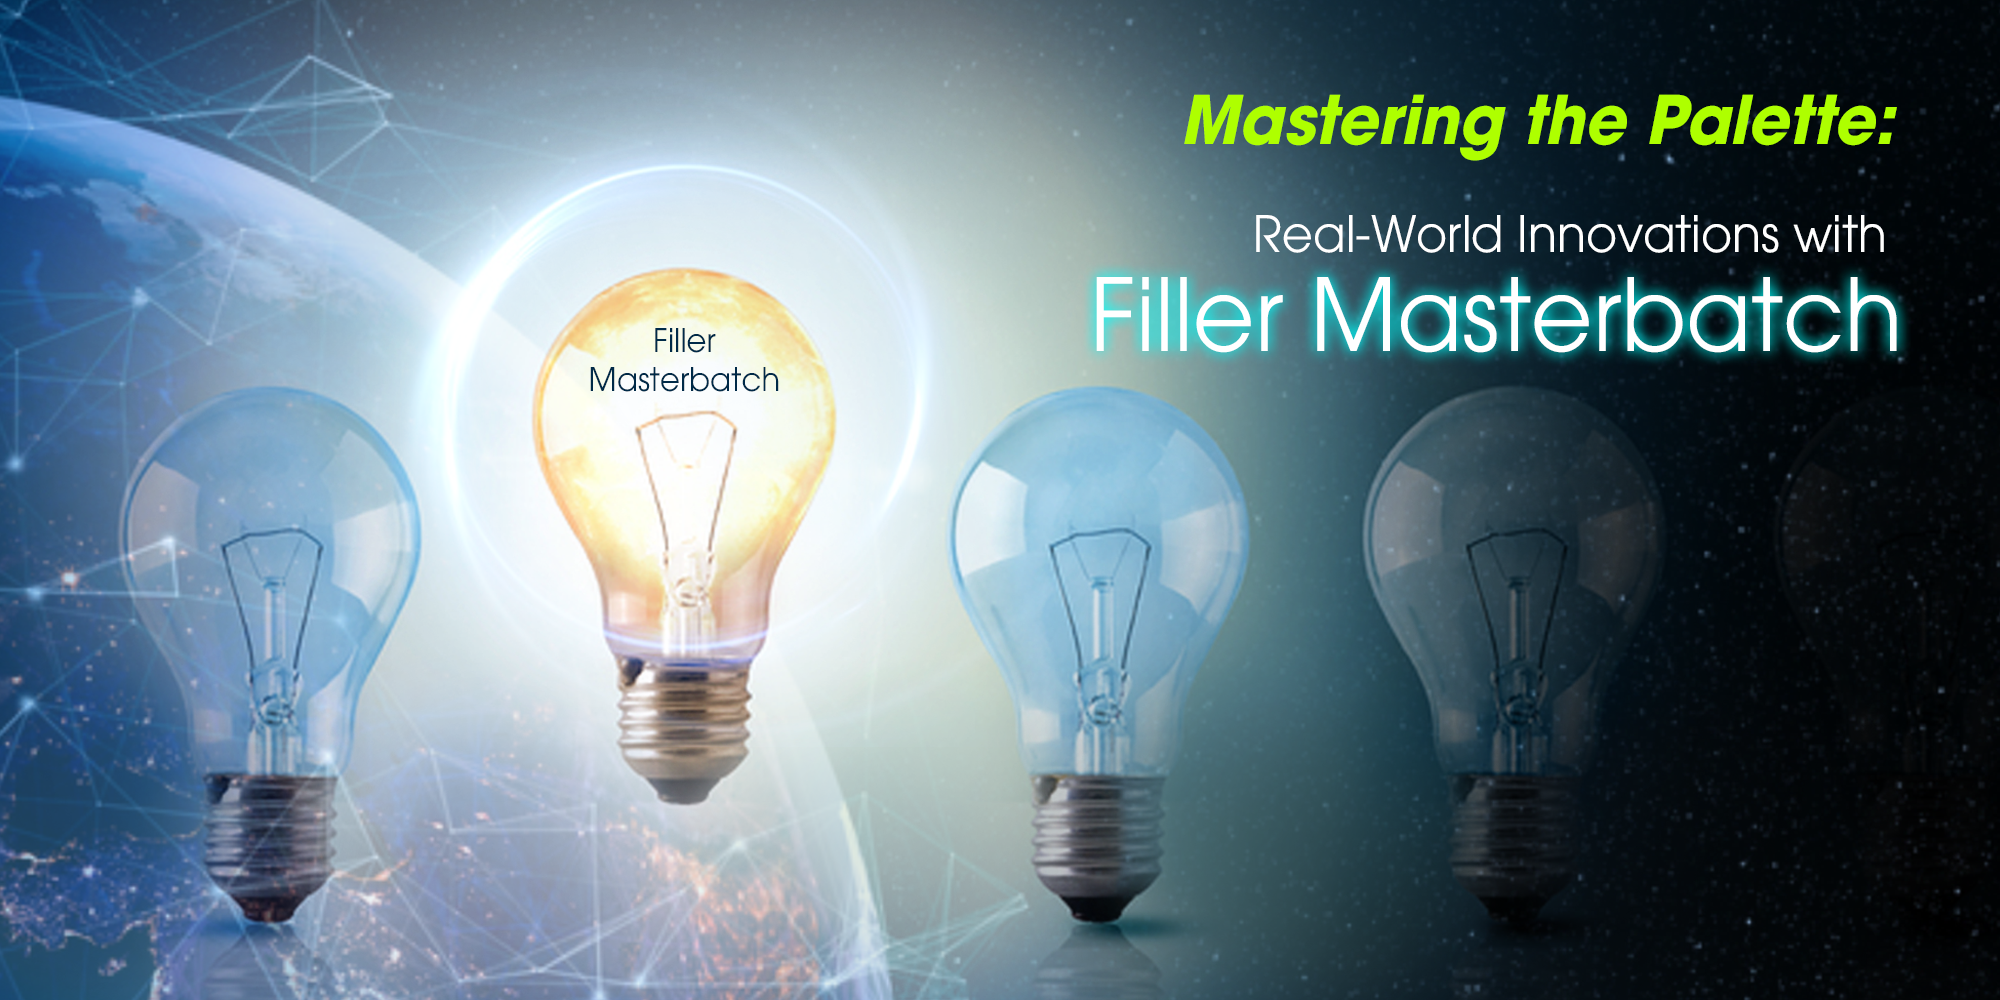 Real-World Innovations With Filler Masterbatch